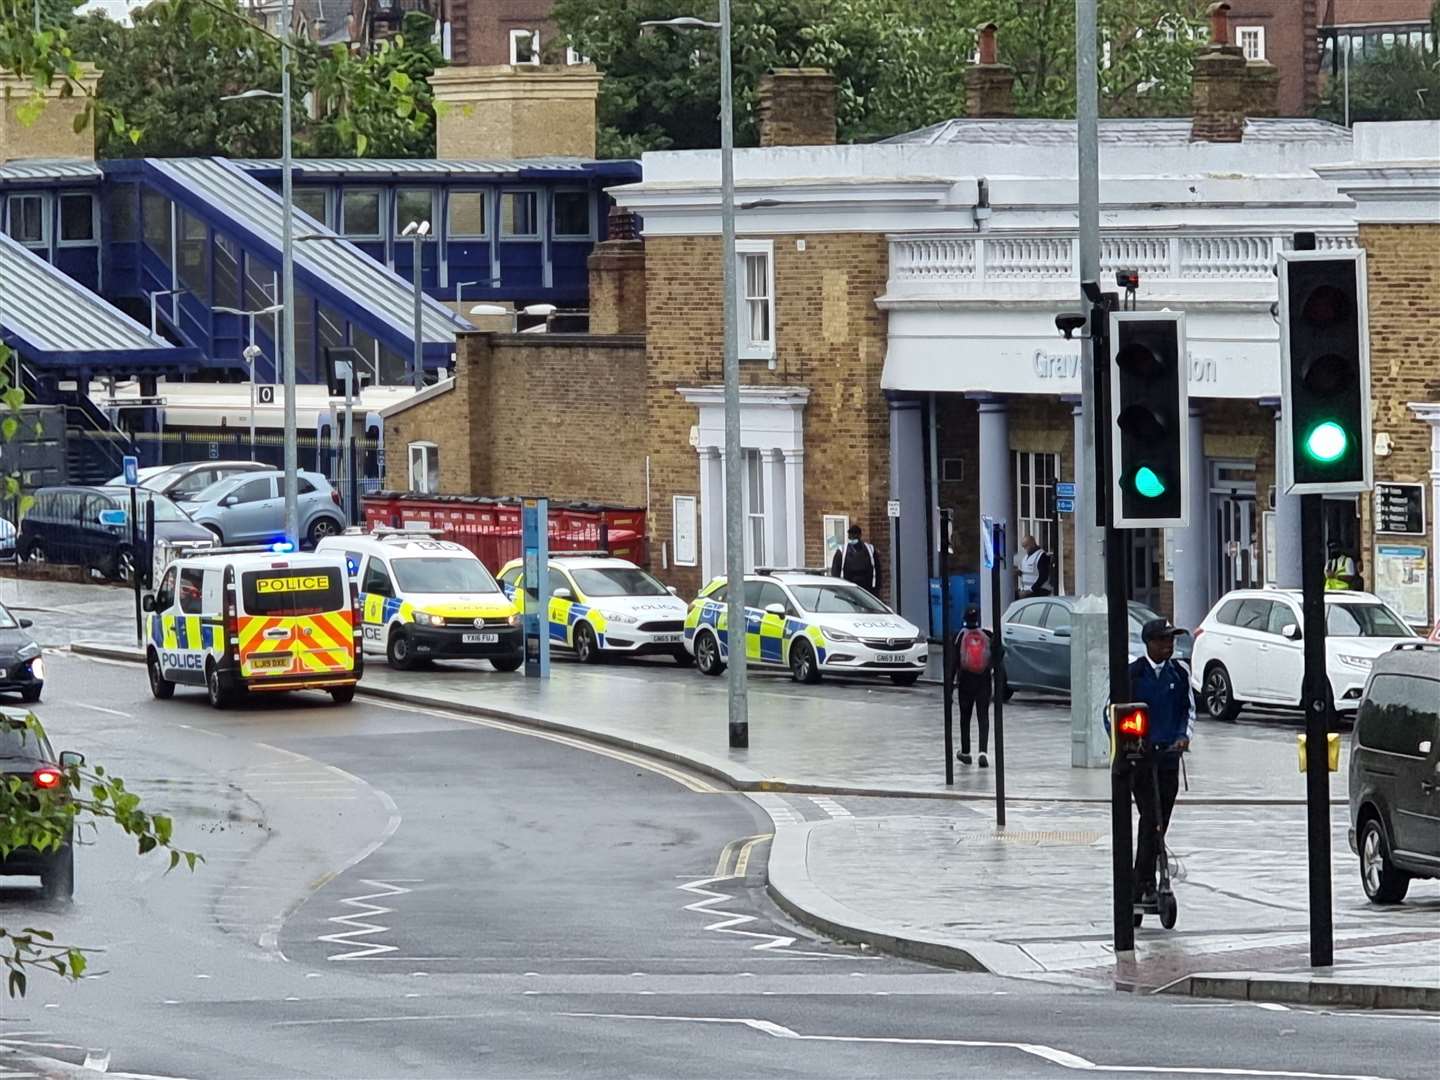 Police were called to Gravesend train station on Monday afternoon